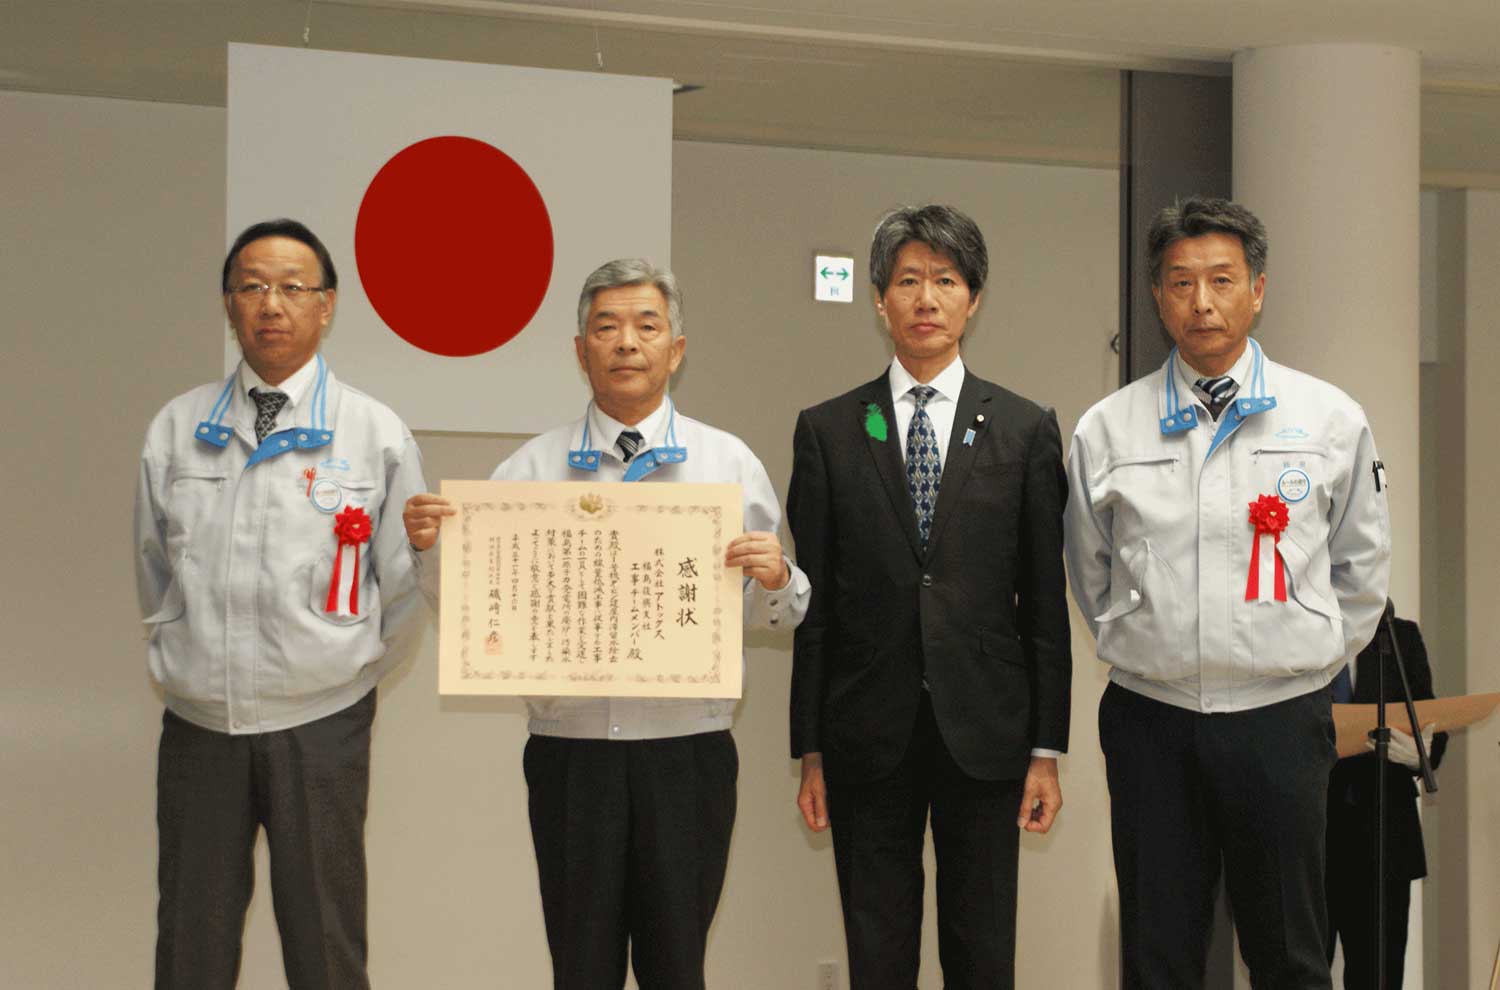 ATOX Fukushima Reconstruction Branch received Letter of Appreciation from Ministry of Economy, Trade and Industry.